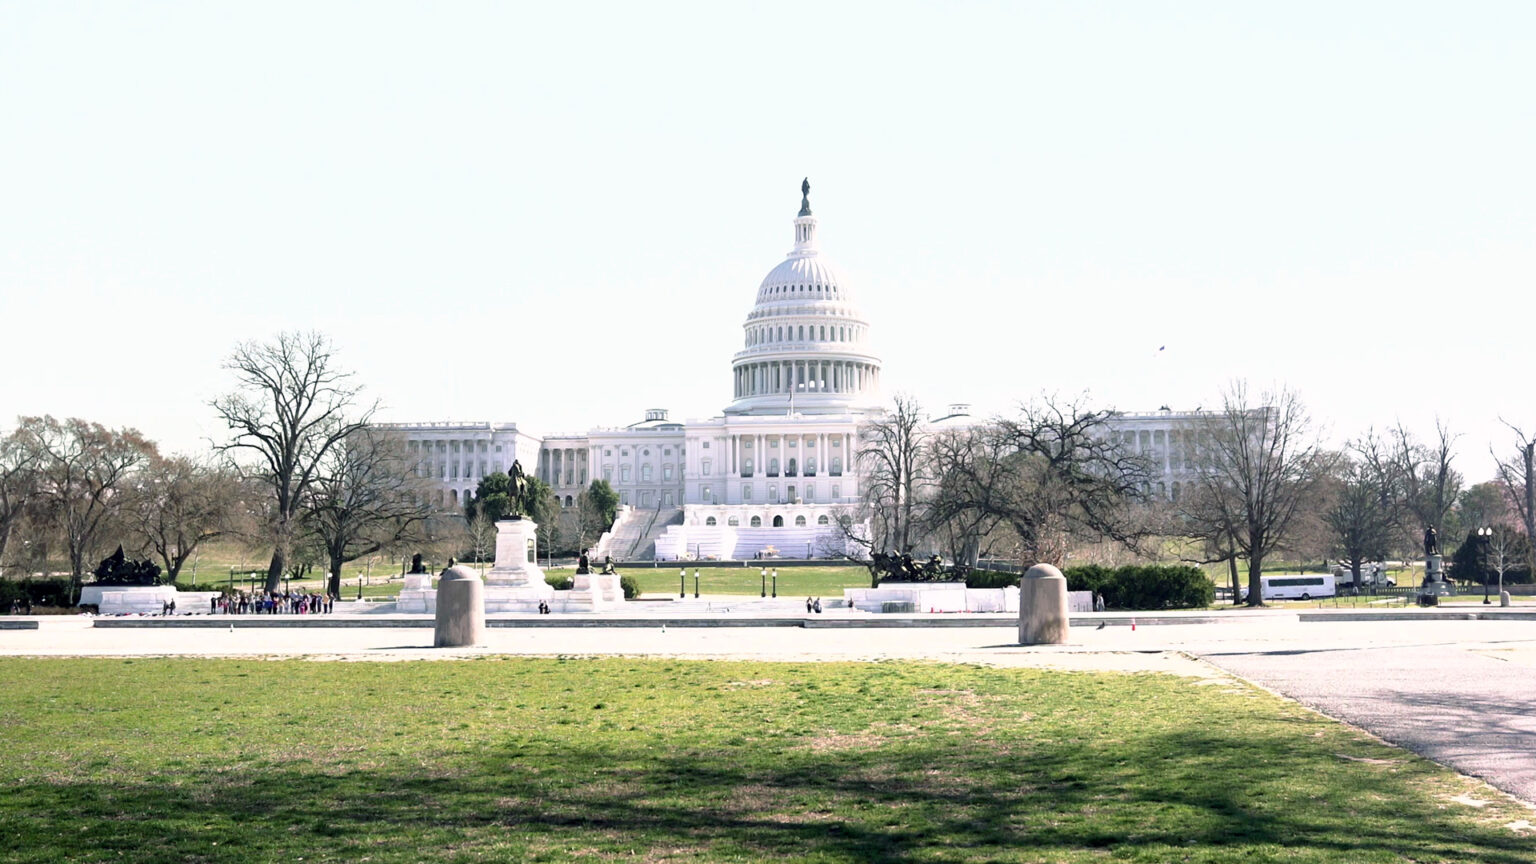 The U.S. Capitol Building stands under a cloudless ski with roads, lawns, statuary, leafless trees and pedestrians in the foreground.